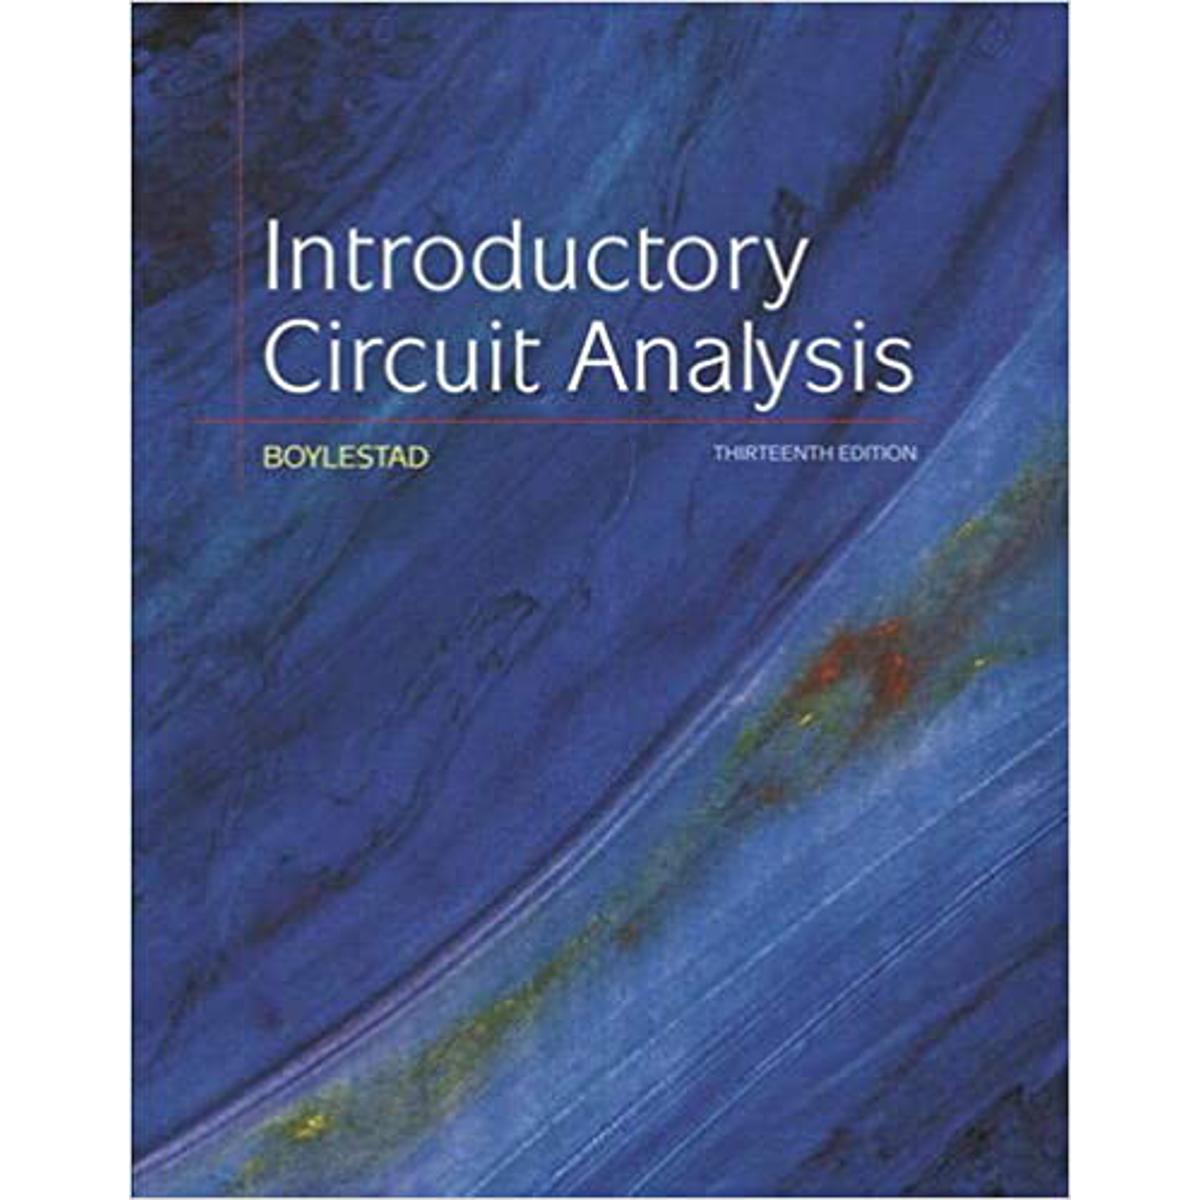 Introductory Circuit Analysis by Boylestad 13rd Edition